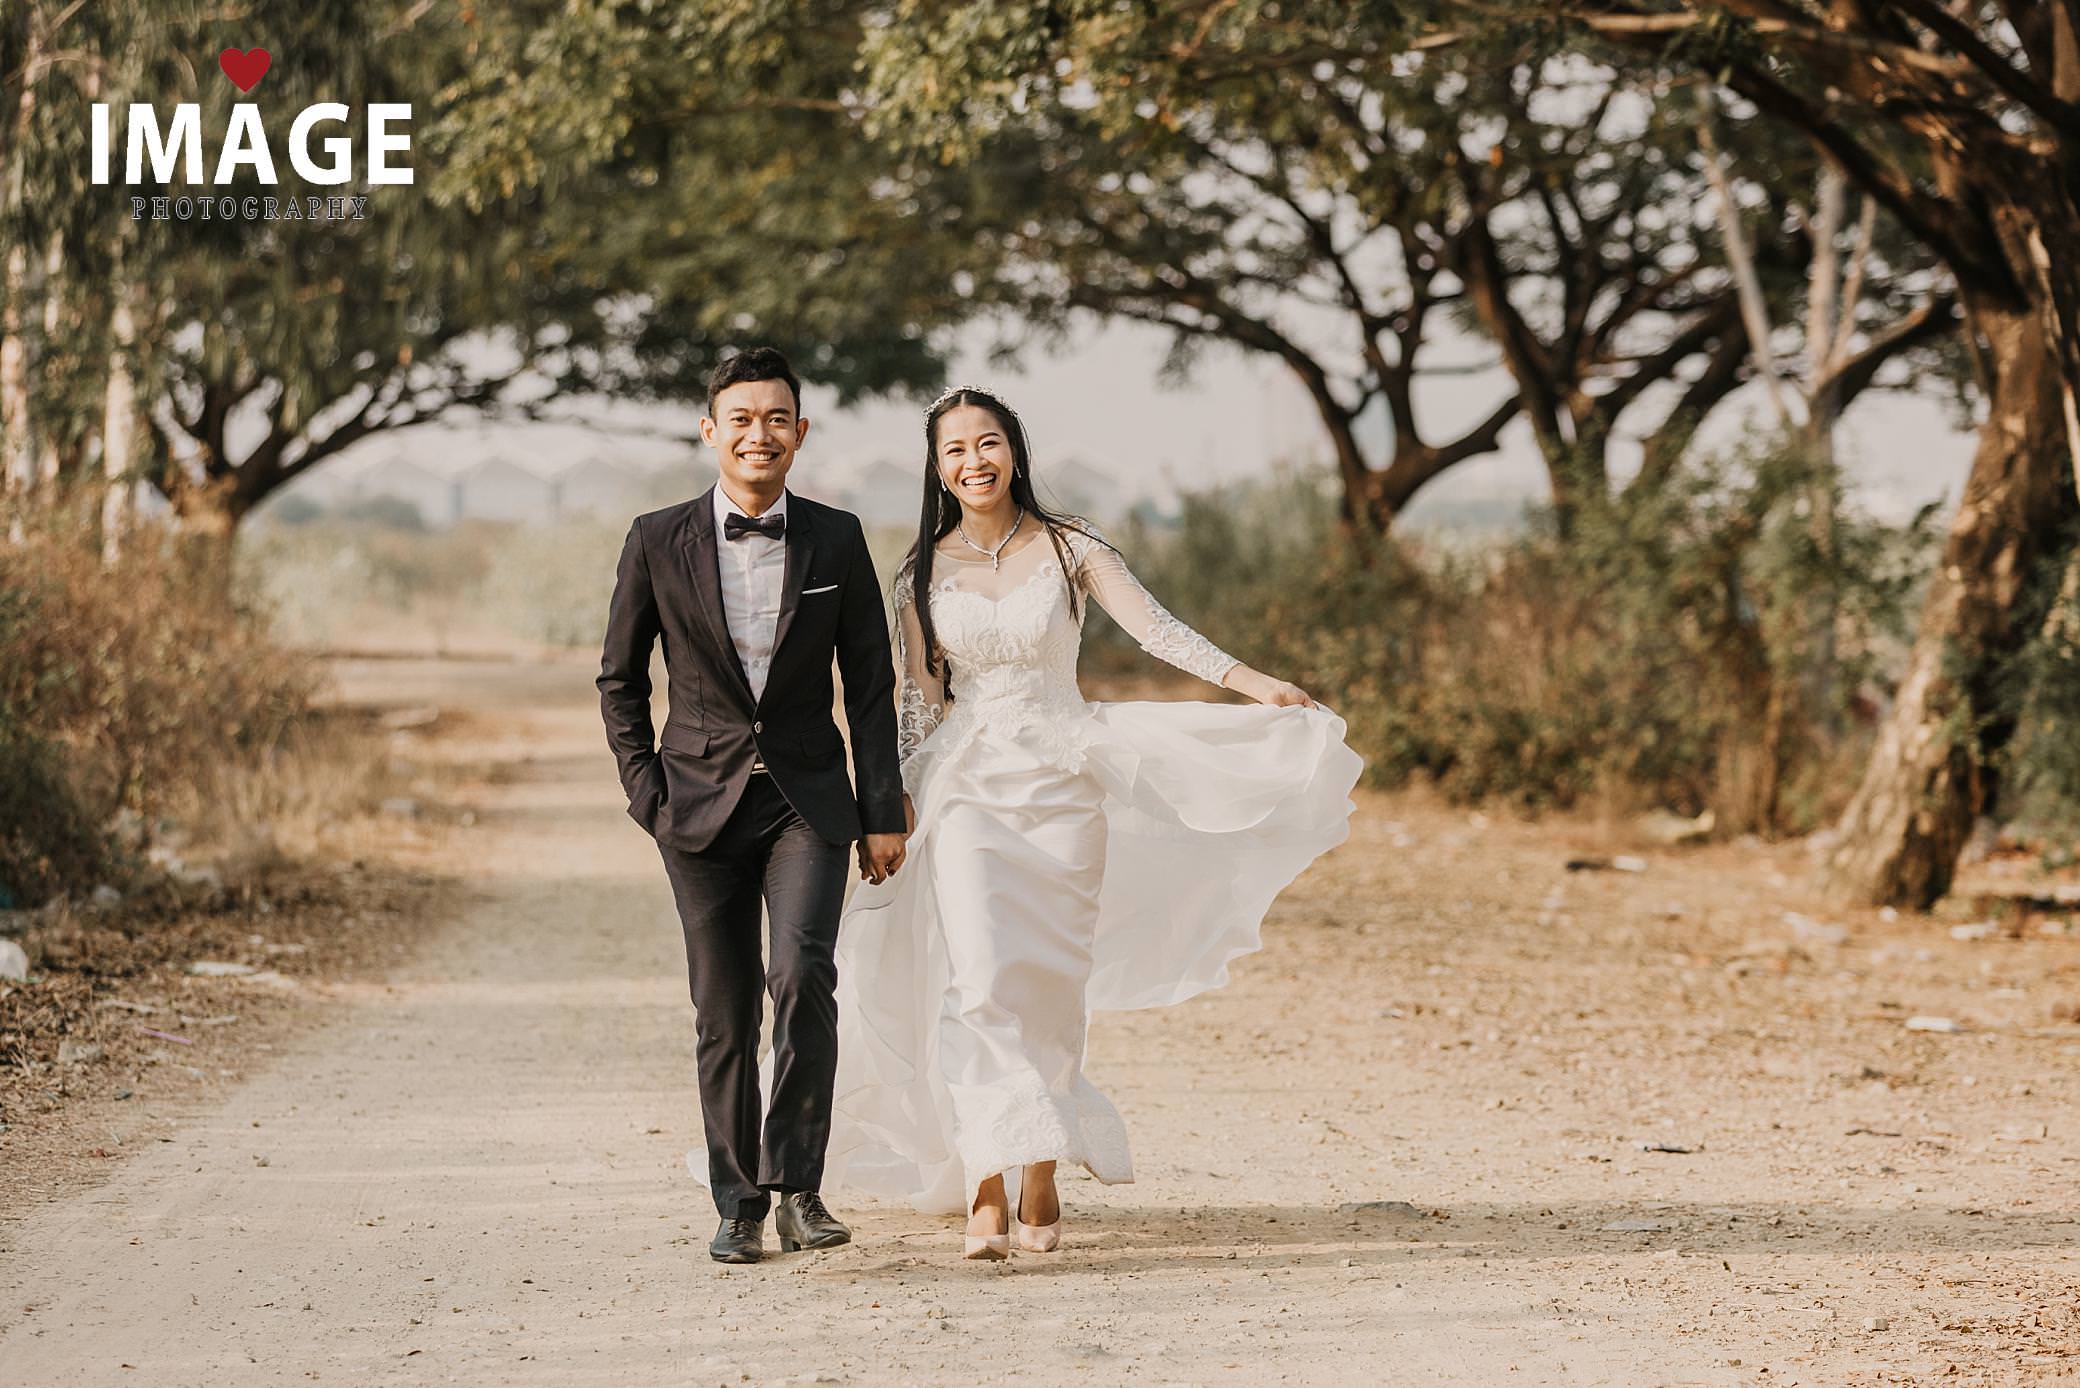 a tree lined road way with a bride and groom walk holding hands as she hold her white lace dress they are laughing on a road in cambodia